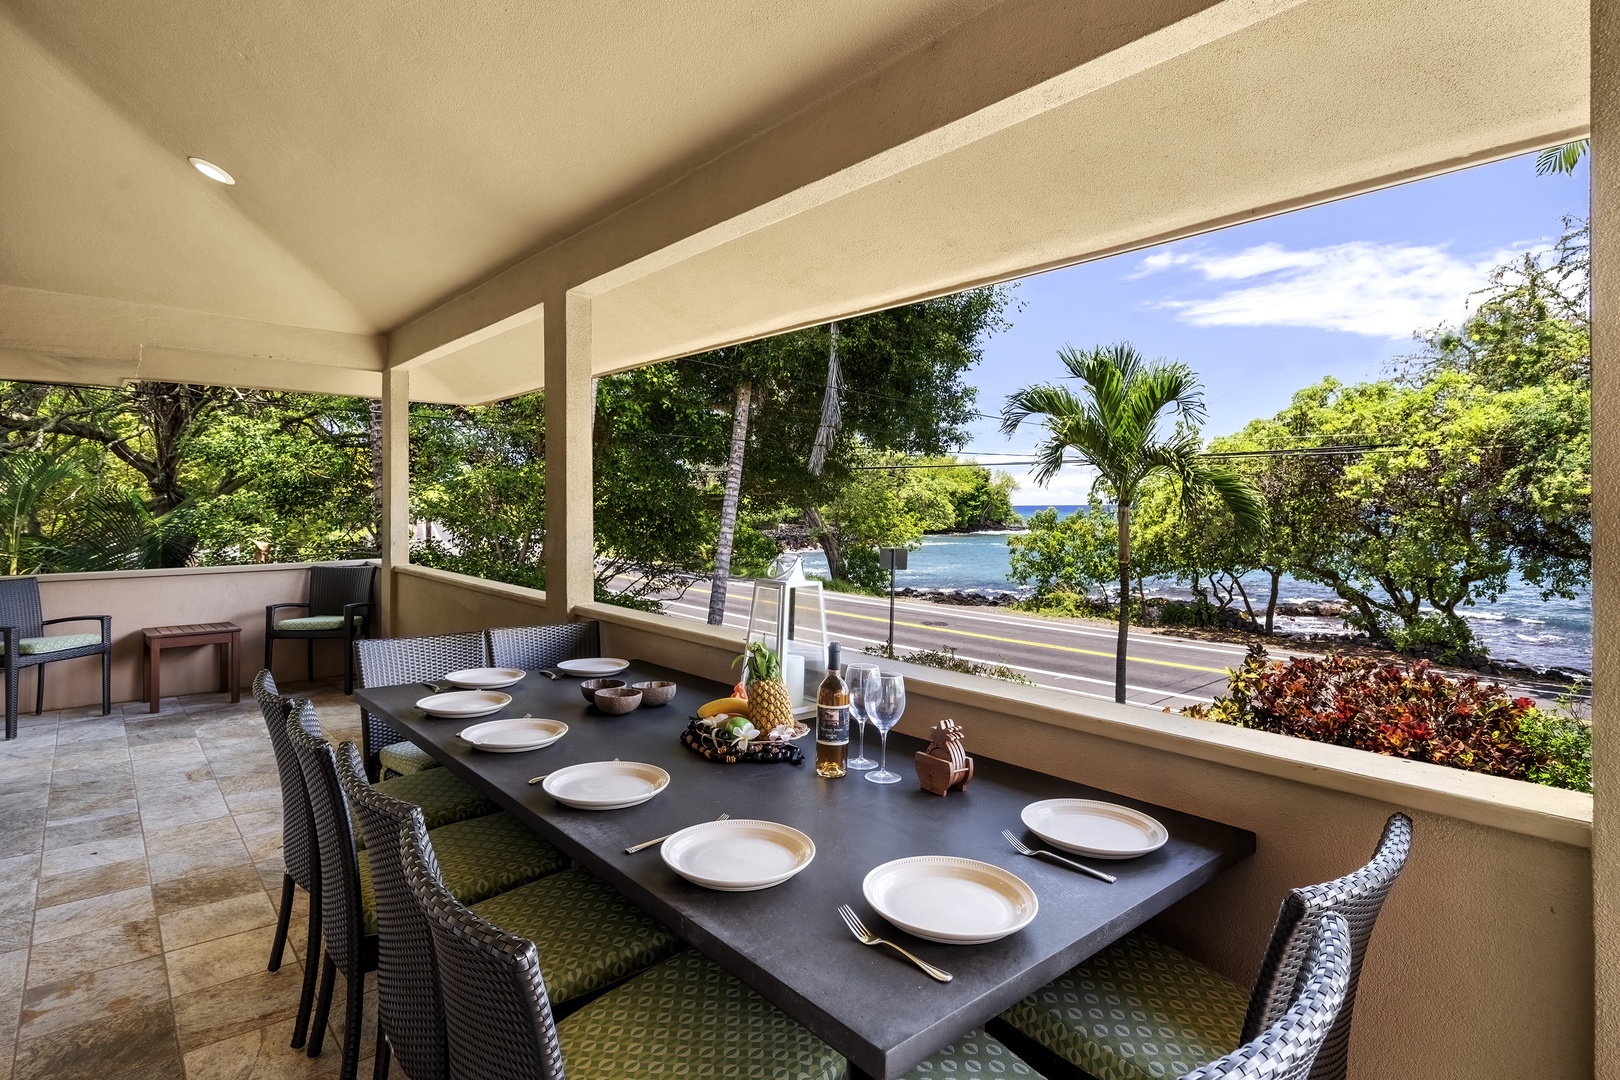 Kailua Kona Vacation Rentals, Lymans Bay Hale - Outdoor dining for 8 with picturesque views!